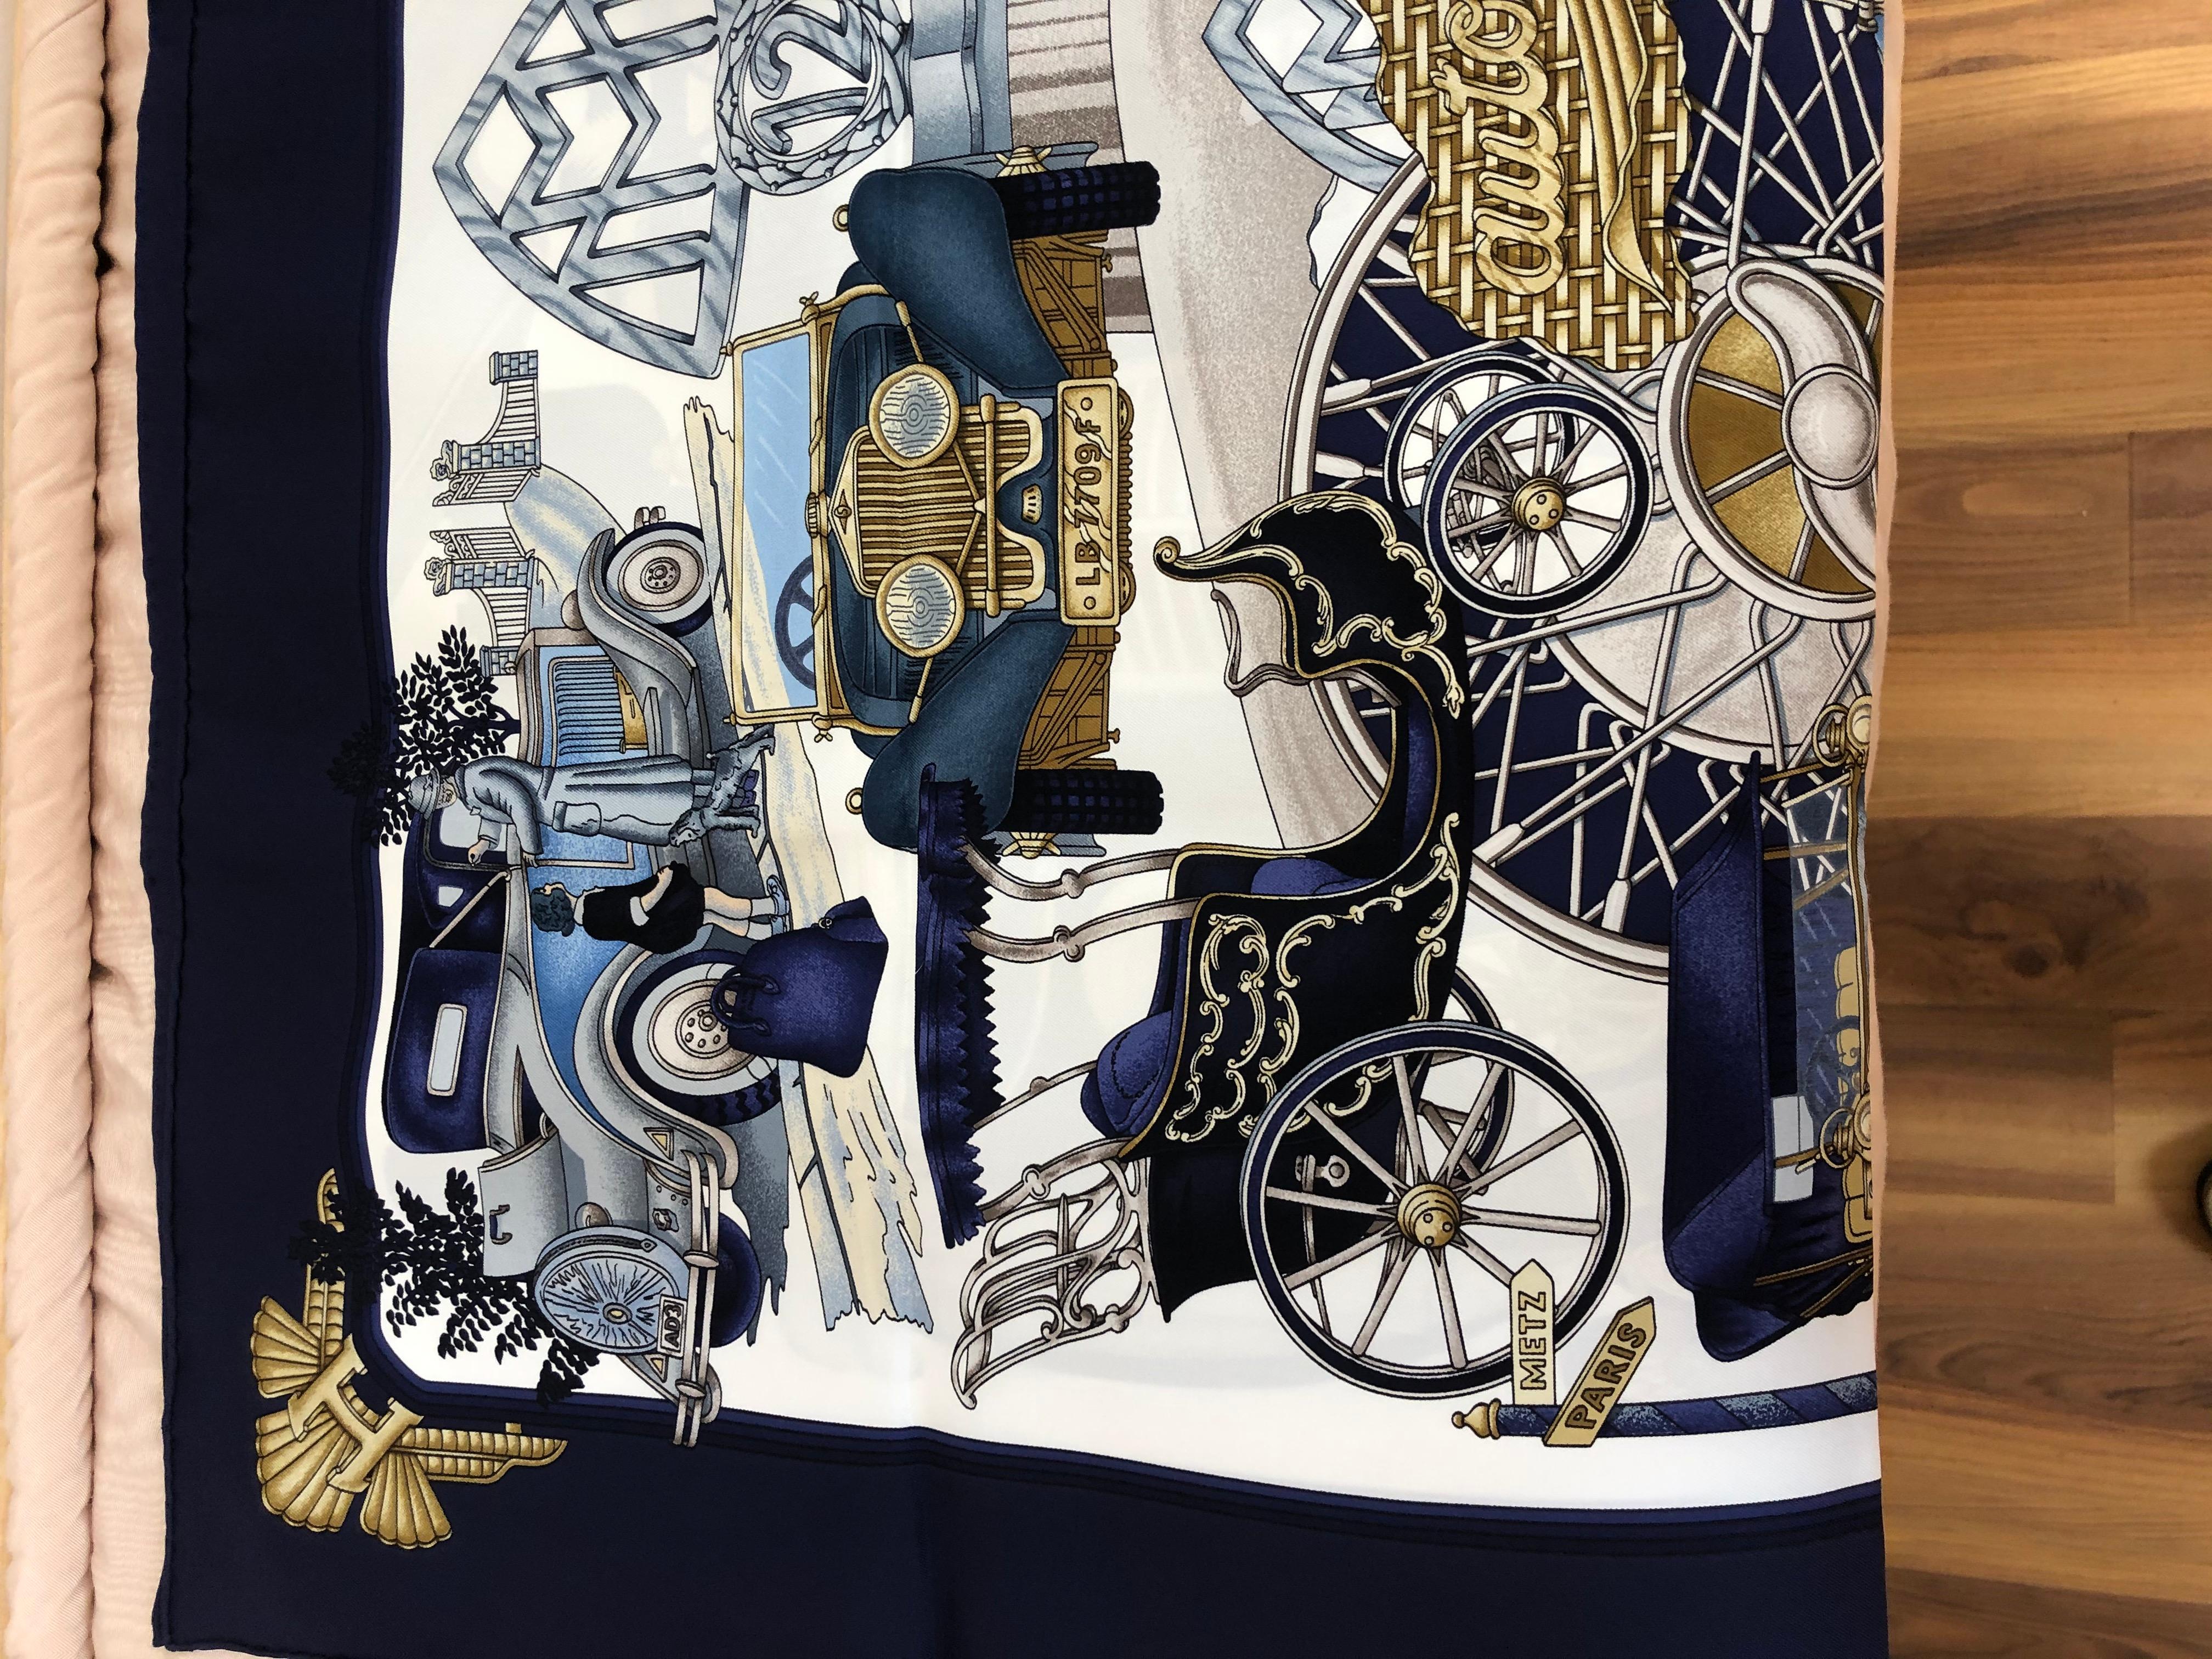 Any cars lovers? This Hermes twill silk scarf designed in 1996 by Joachim Metz is replete with images of some of the most iconic early automobiles.

The borders and background are a lovely royal blue with a multitude of other colors. The scarf comes